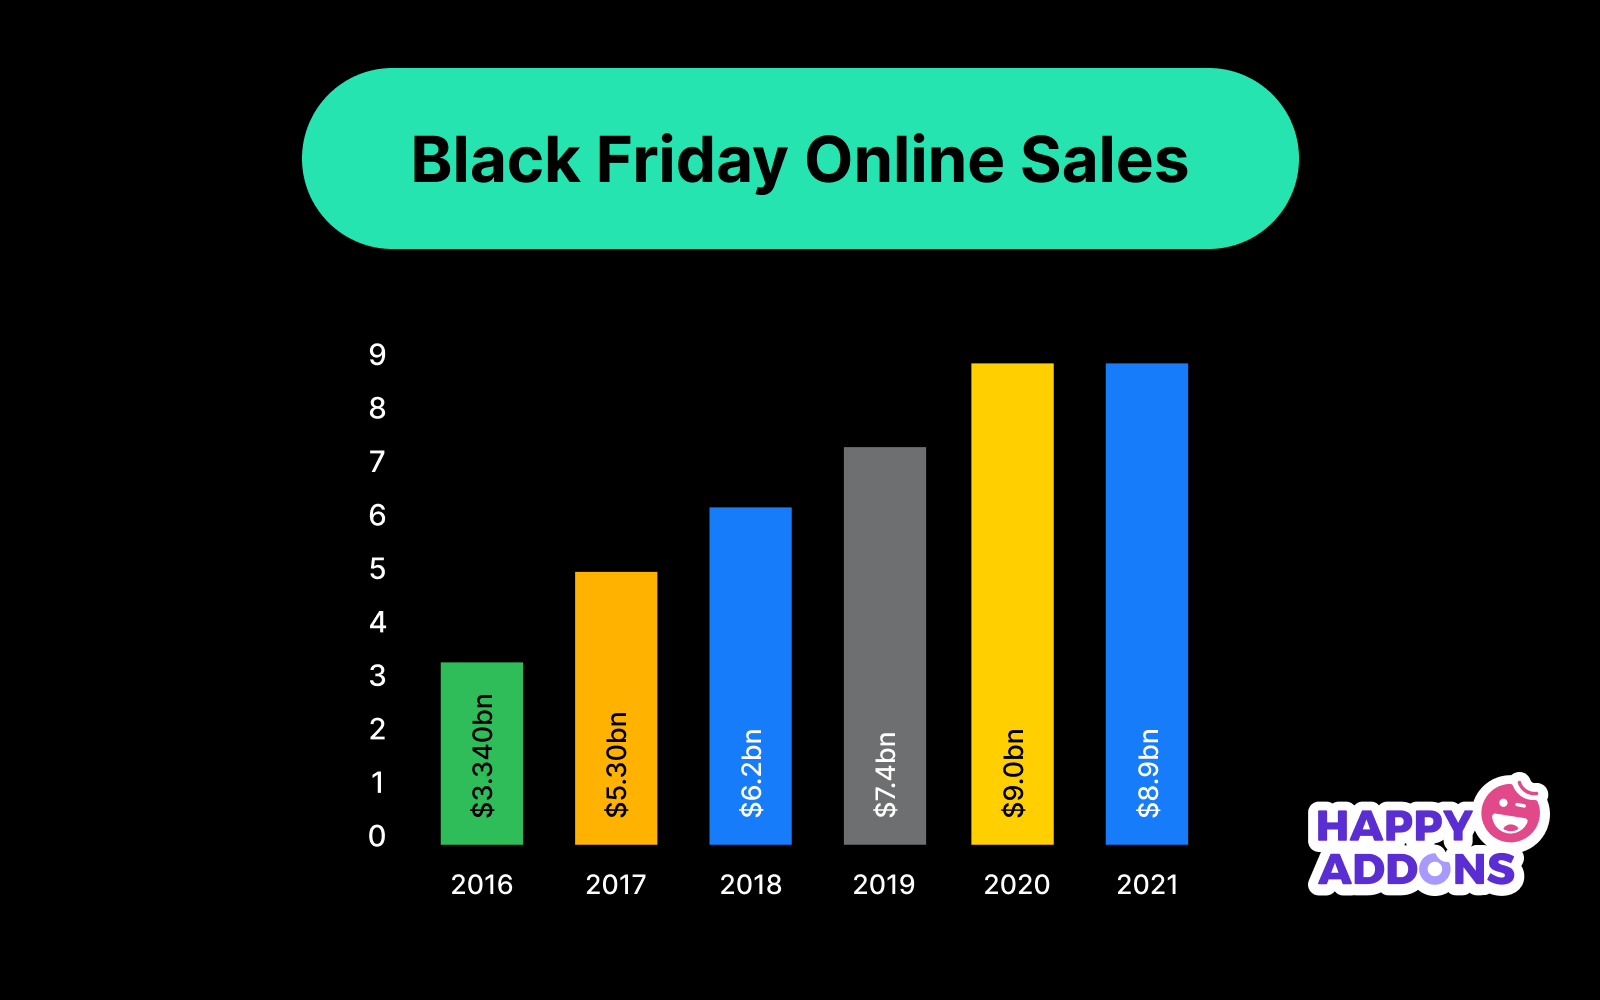 Statistics on Black Friday Sales over the Last Few Years